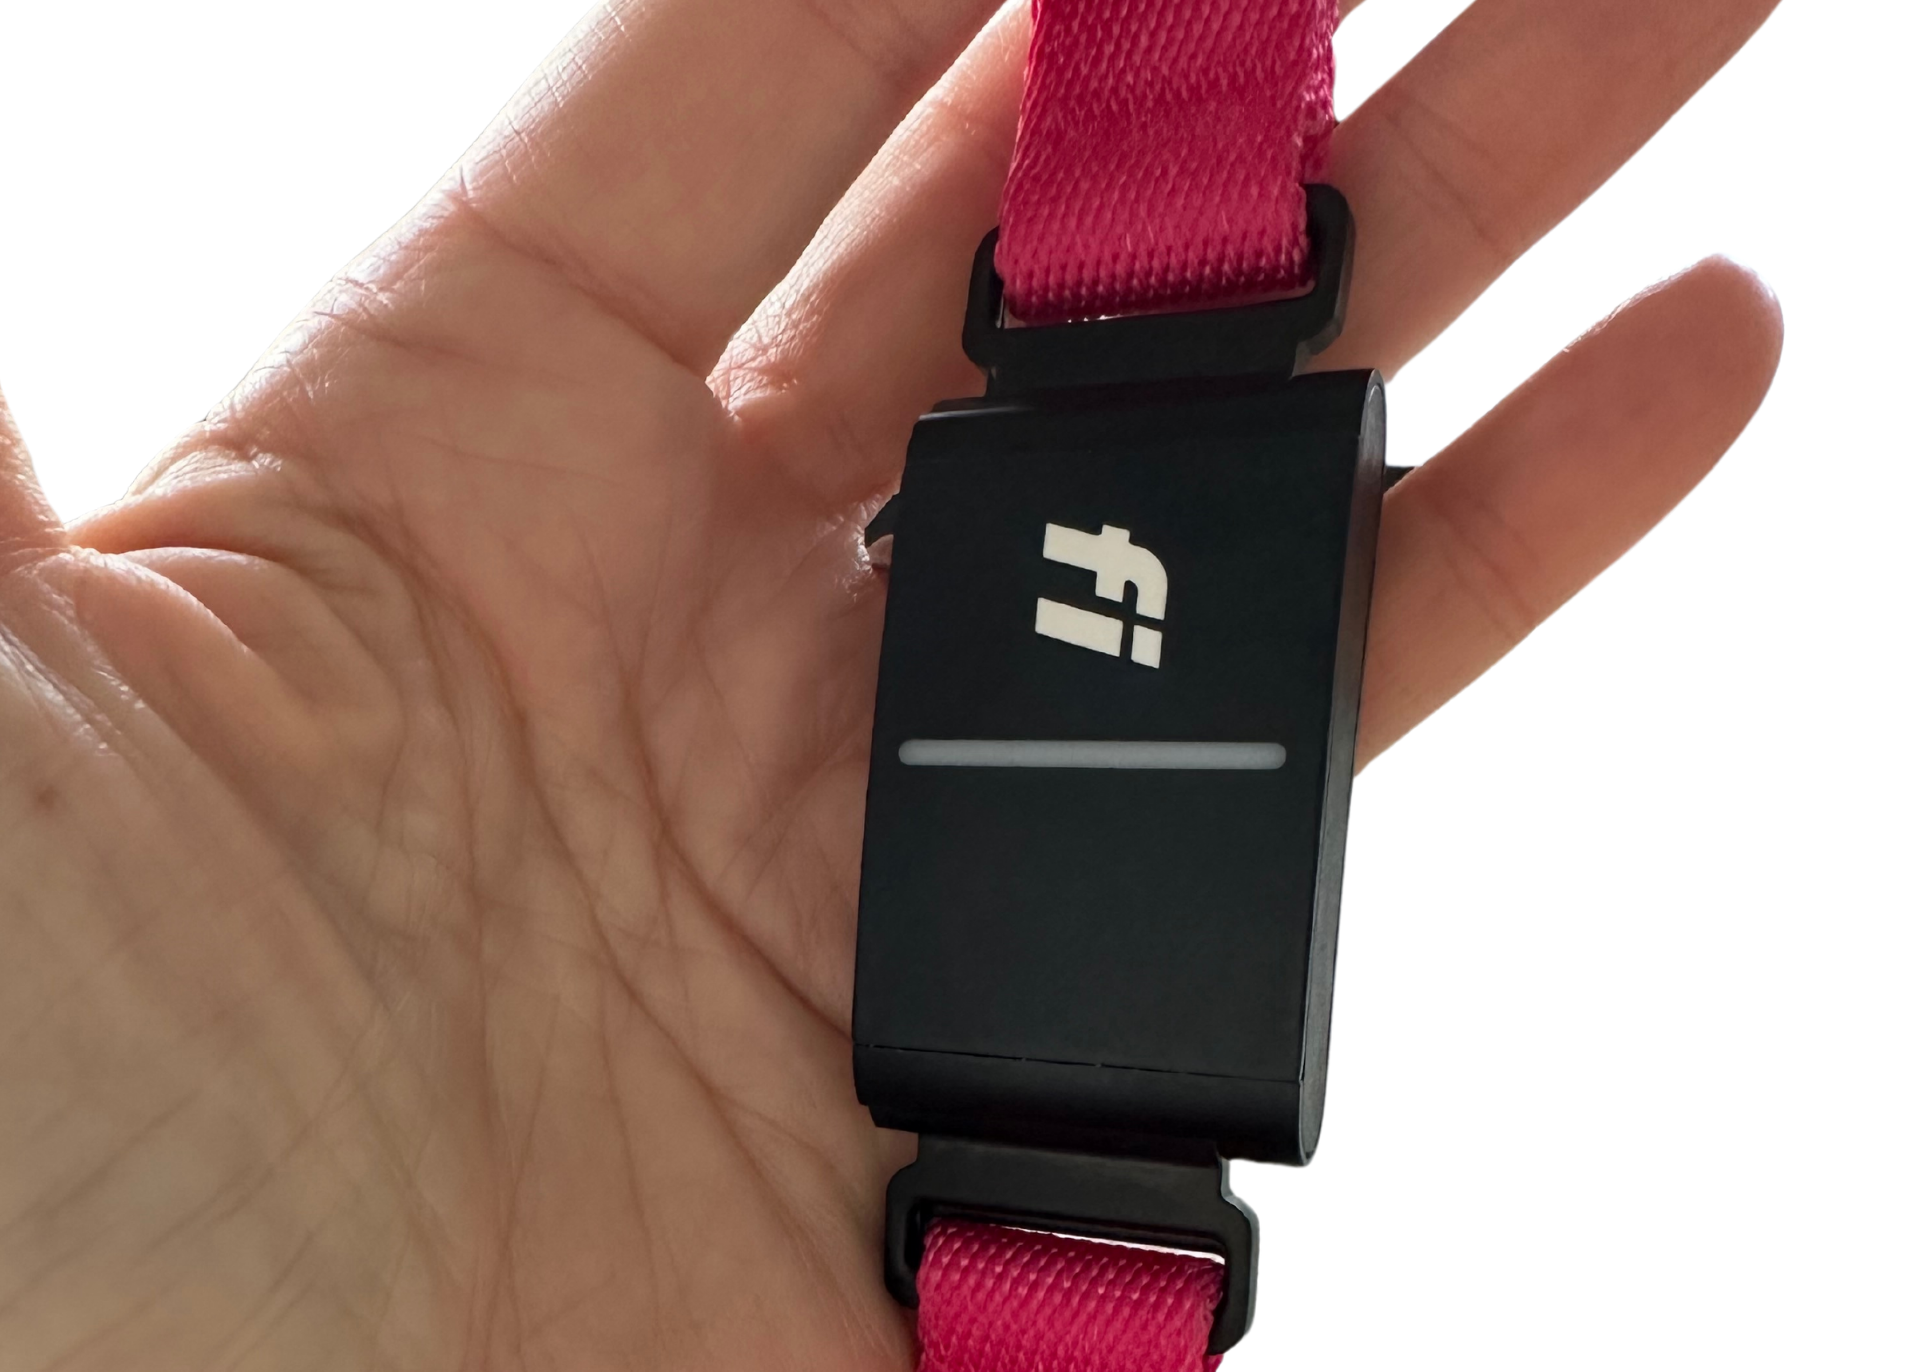 Close up of Fi GPS device on pink collar being held on human palm